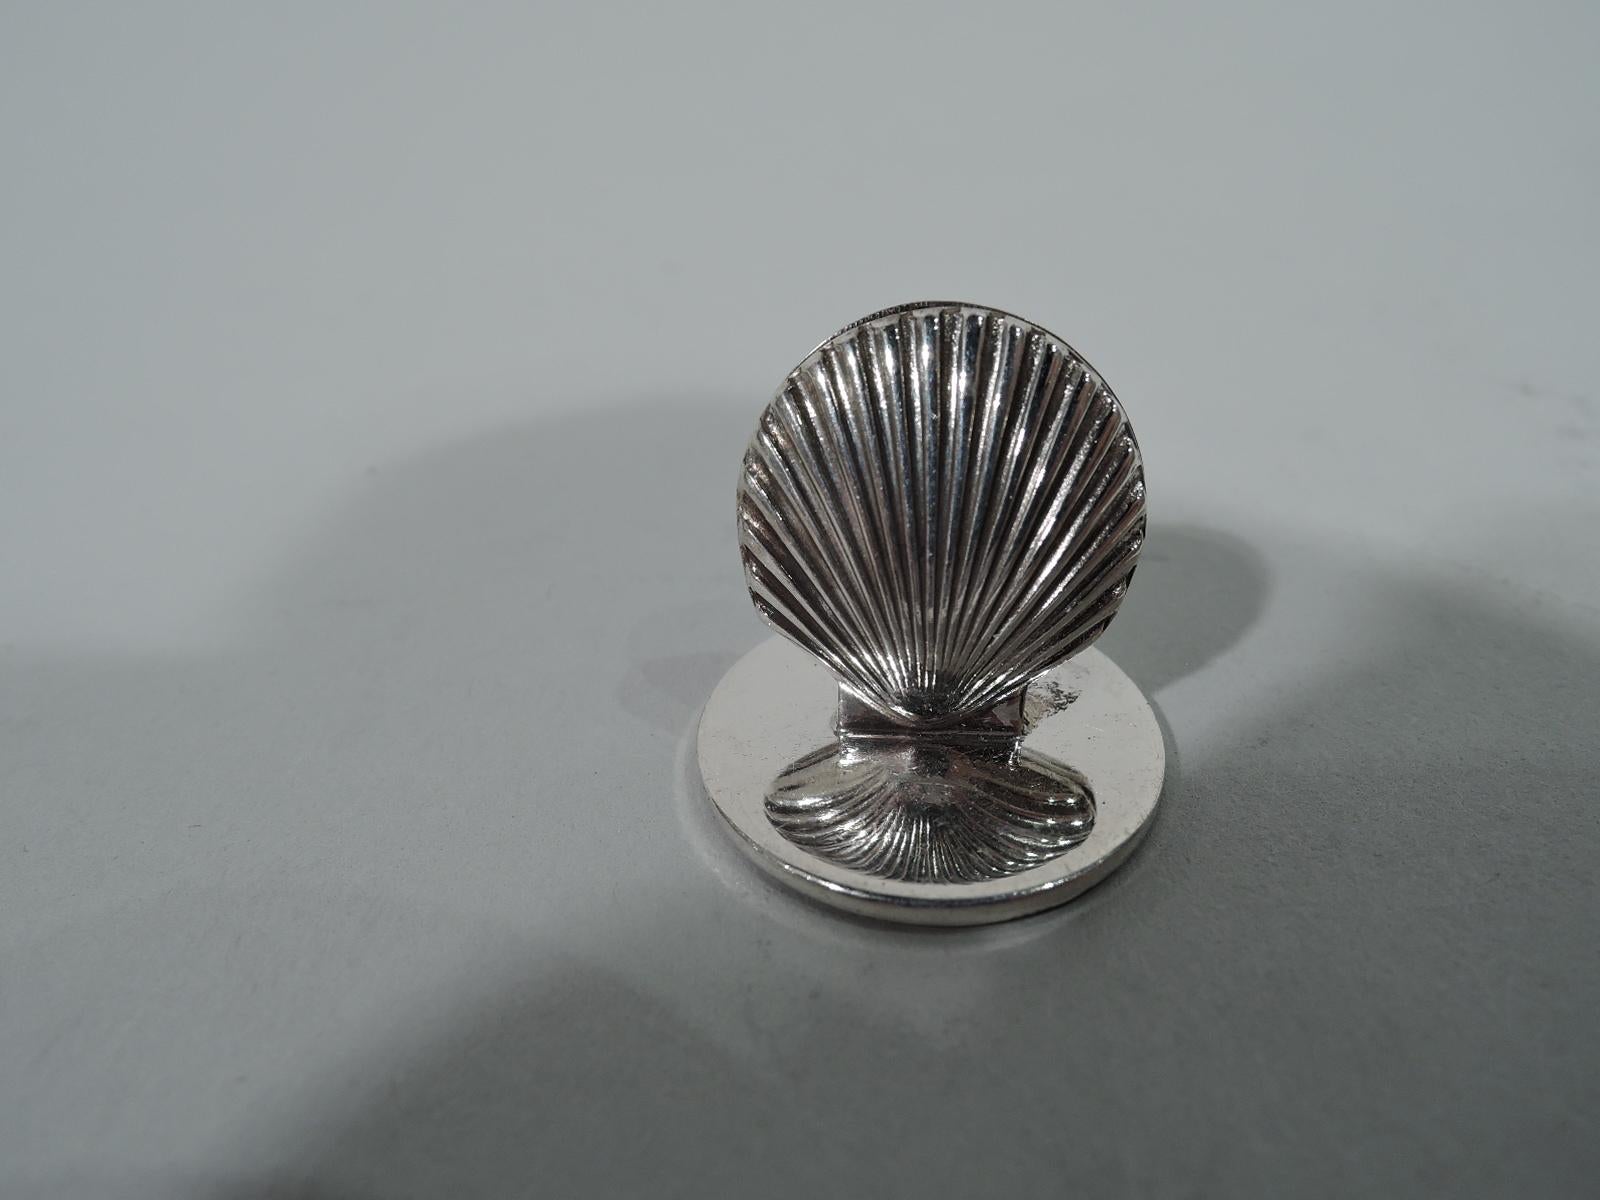 American Classical Set of 14 Tiffany Sterling Silver Scallop Shell Place Card Holders